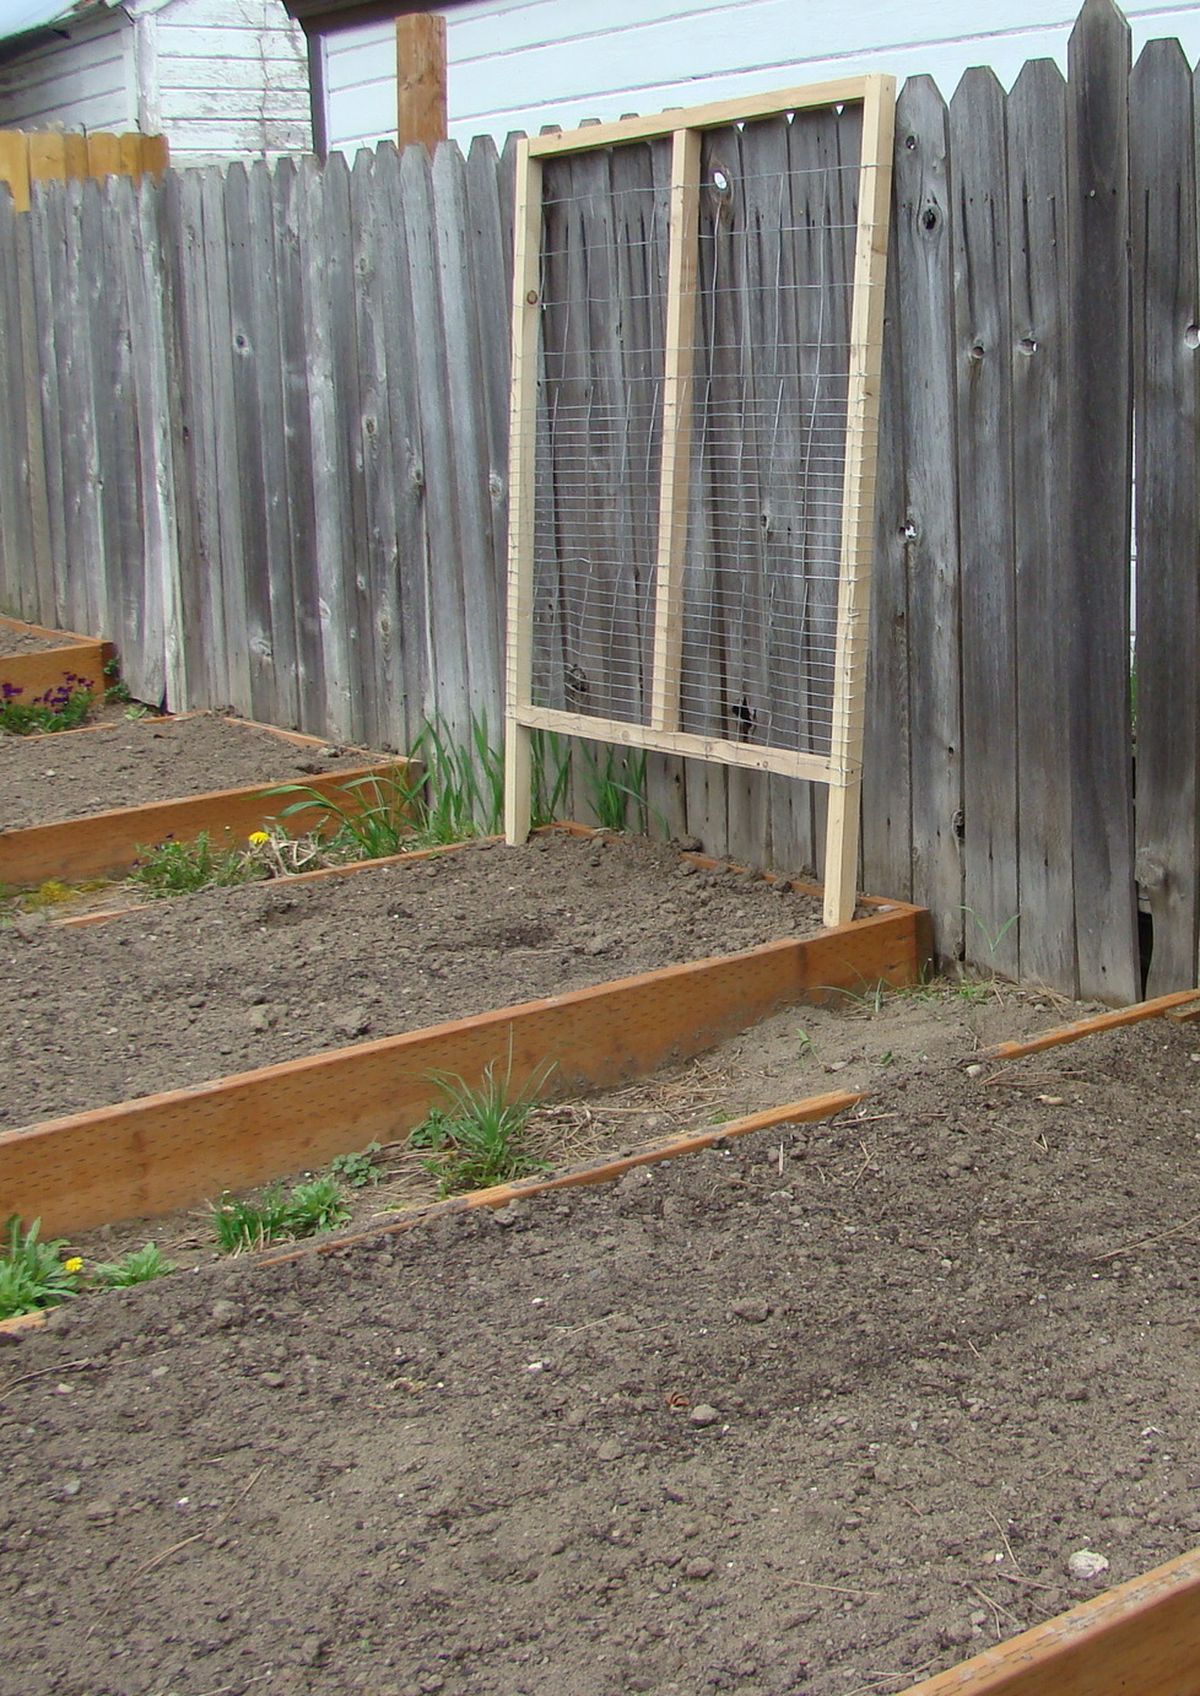 A quick garden trellis is easy to put together and will allow for more growing space in the garden. (Maggie Bullock)